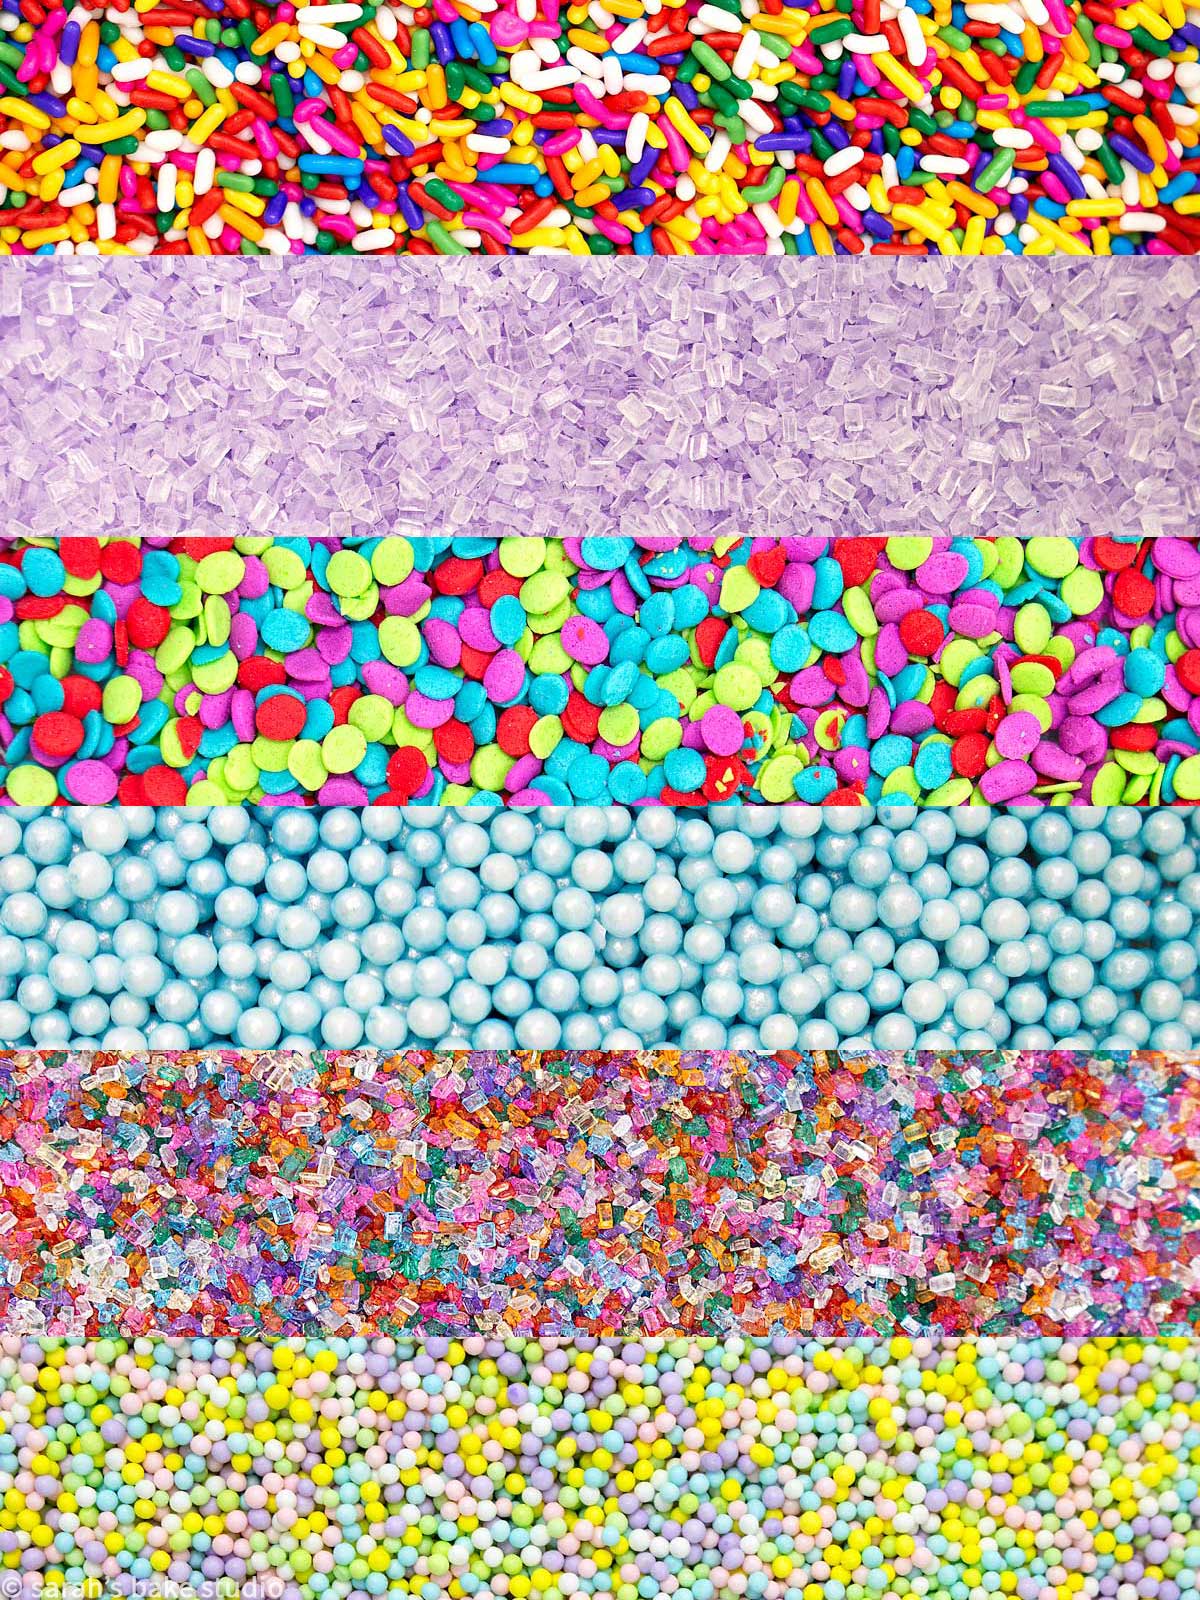 a collage of sprinkles including jimmies, coarse sanding sugar, quins, dragees, nonpareils, and sanding sugar